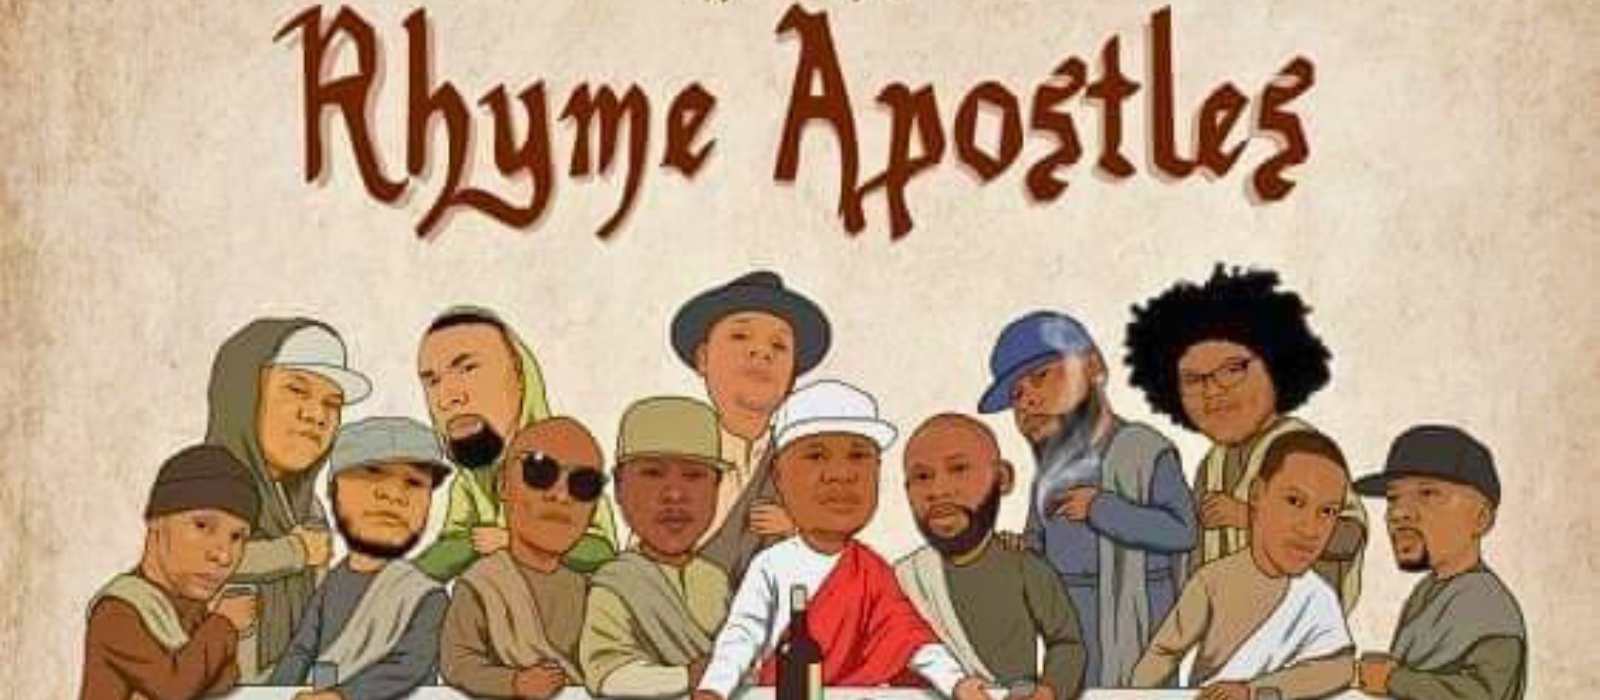 Rhyme Apostles Unleashed: London’s Rhyme Assassin leads a Hip-Hop odyssey with all-star cast